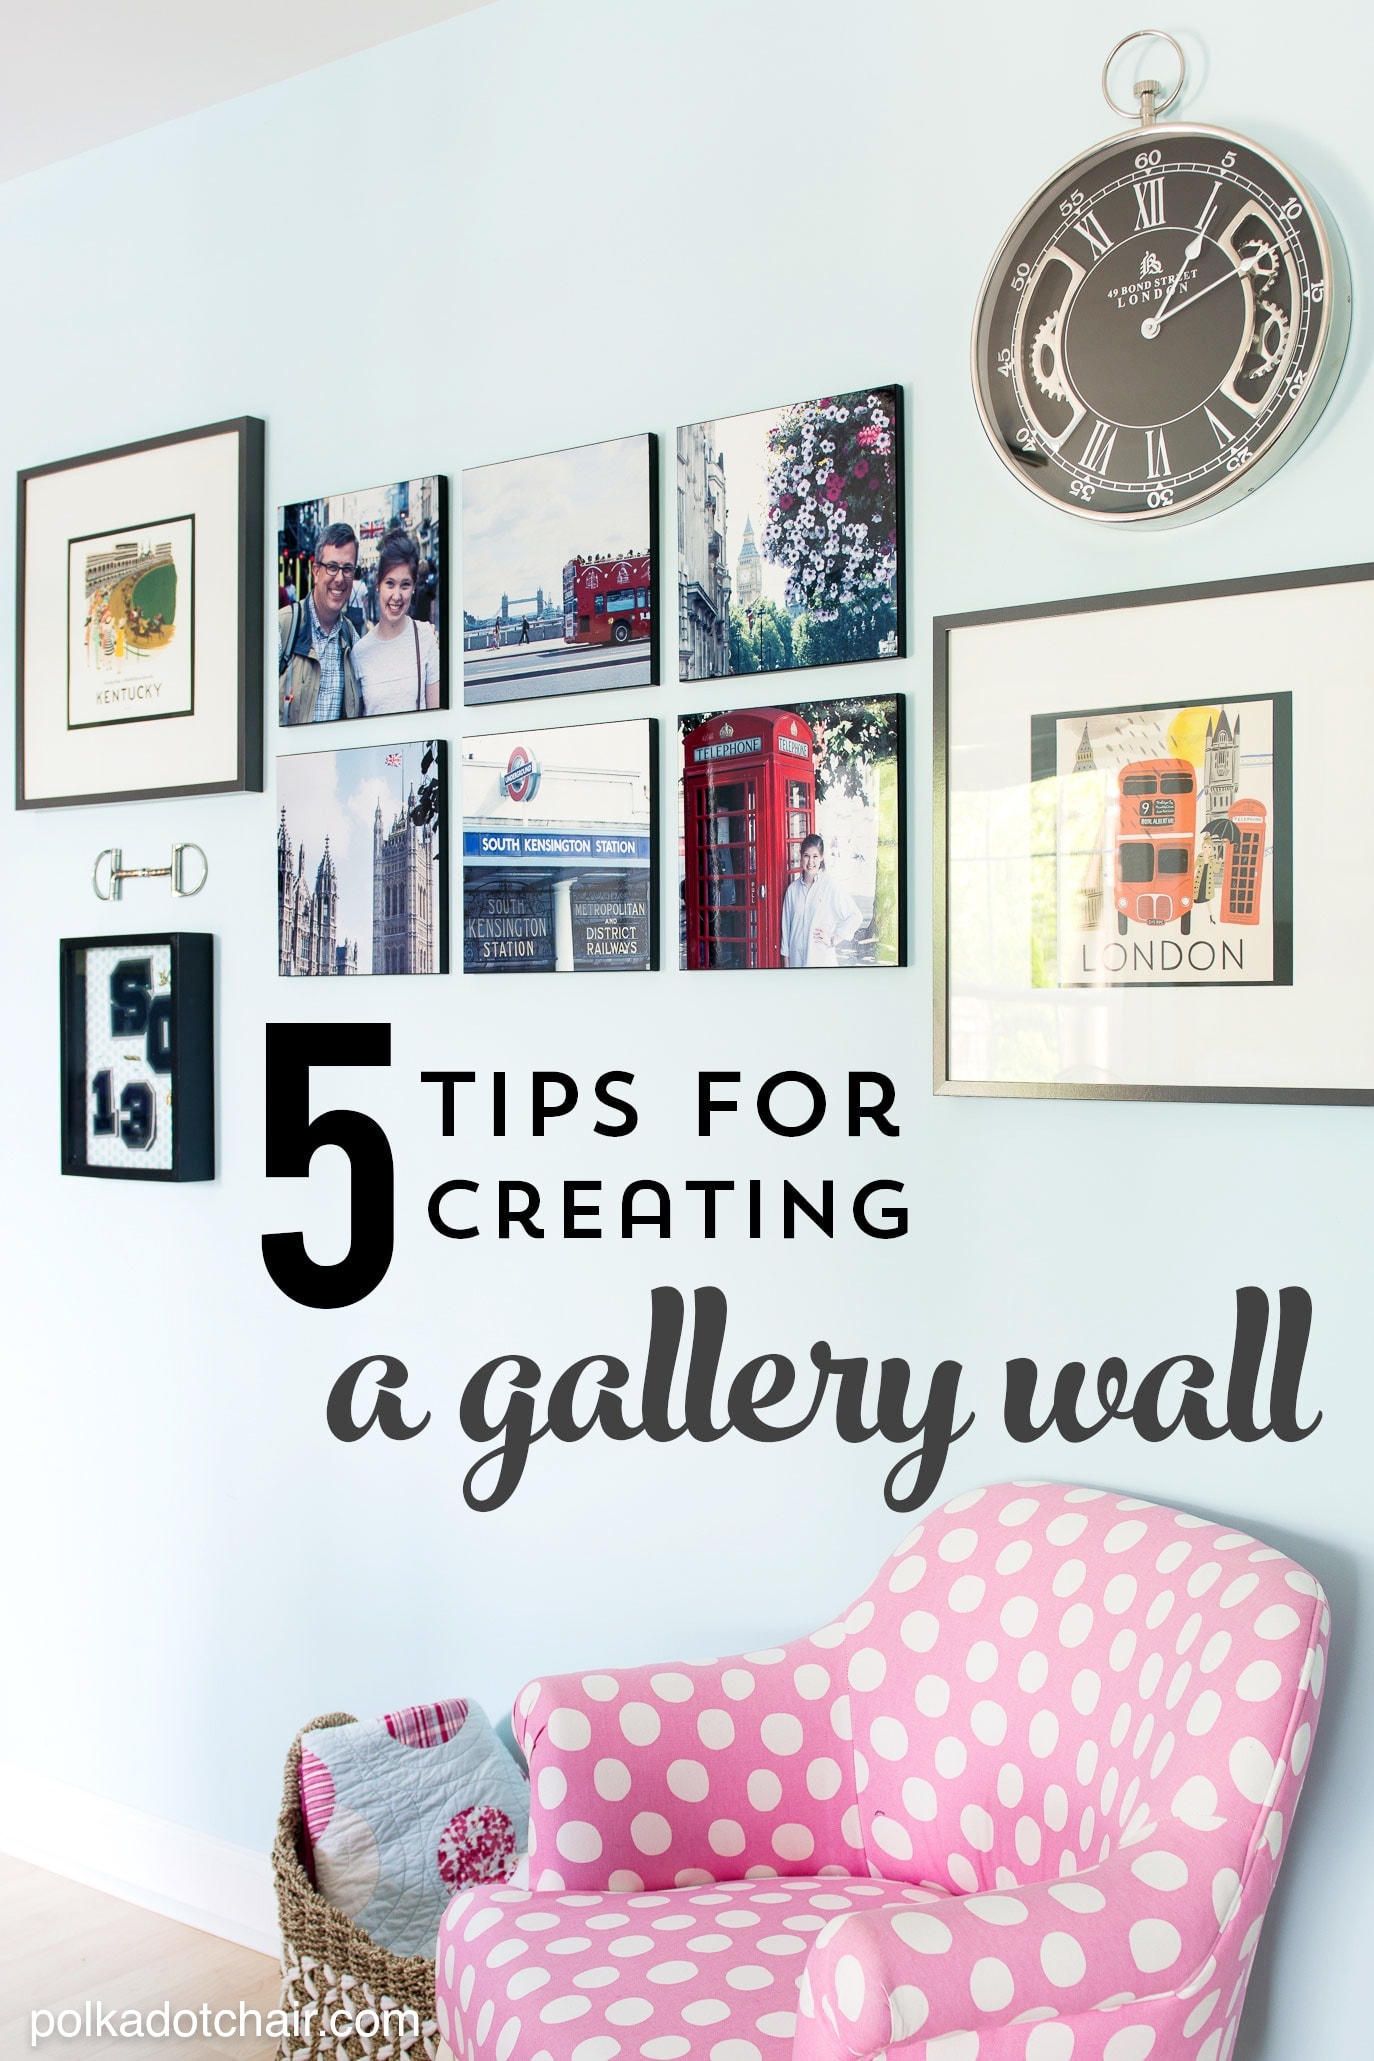 5 Tips for Creating a Gallery Wall